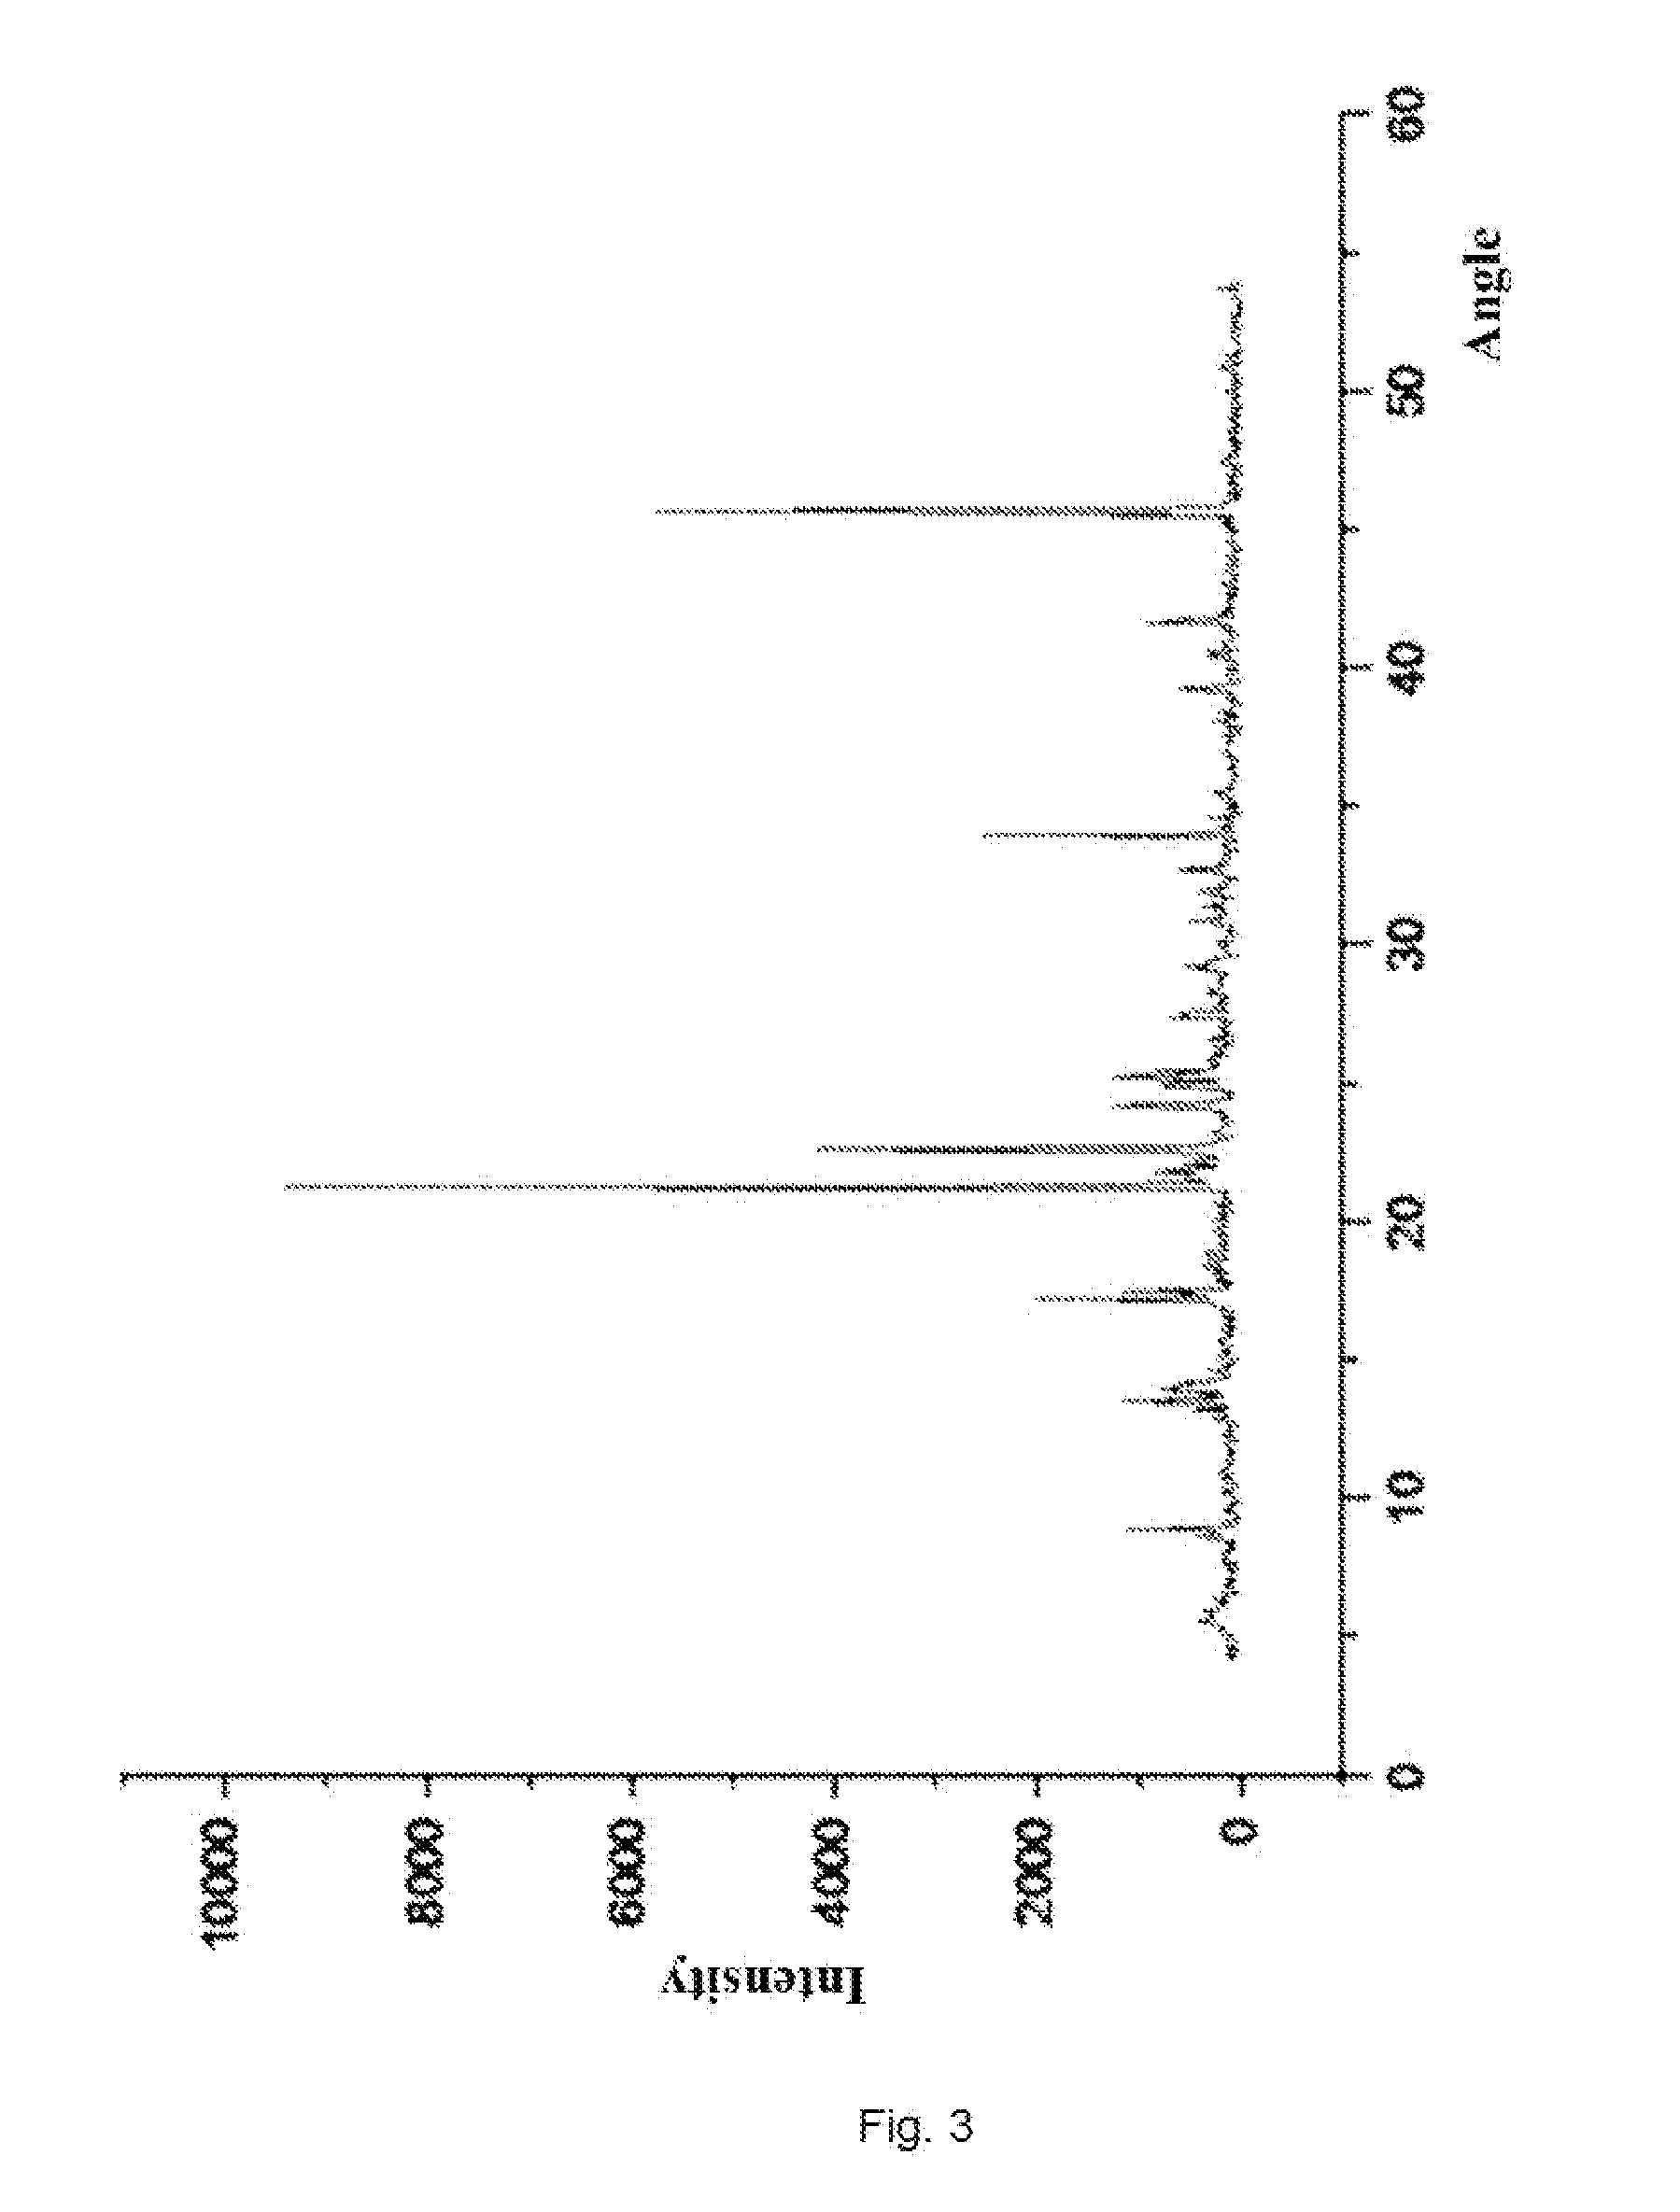 Doripenem intermediate compound, preparation process therefor and use thereof, and preparation process for doripenem